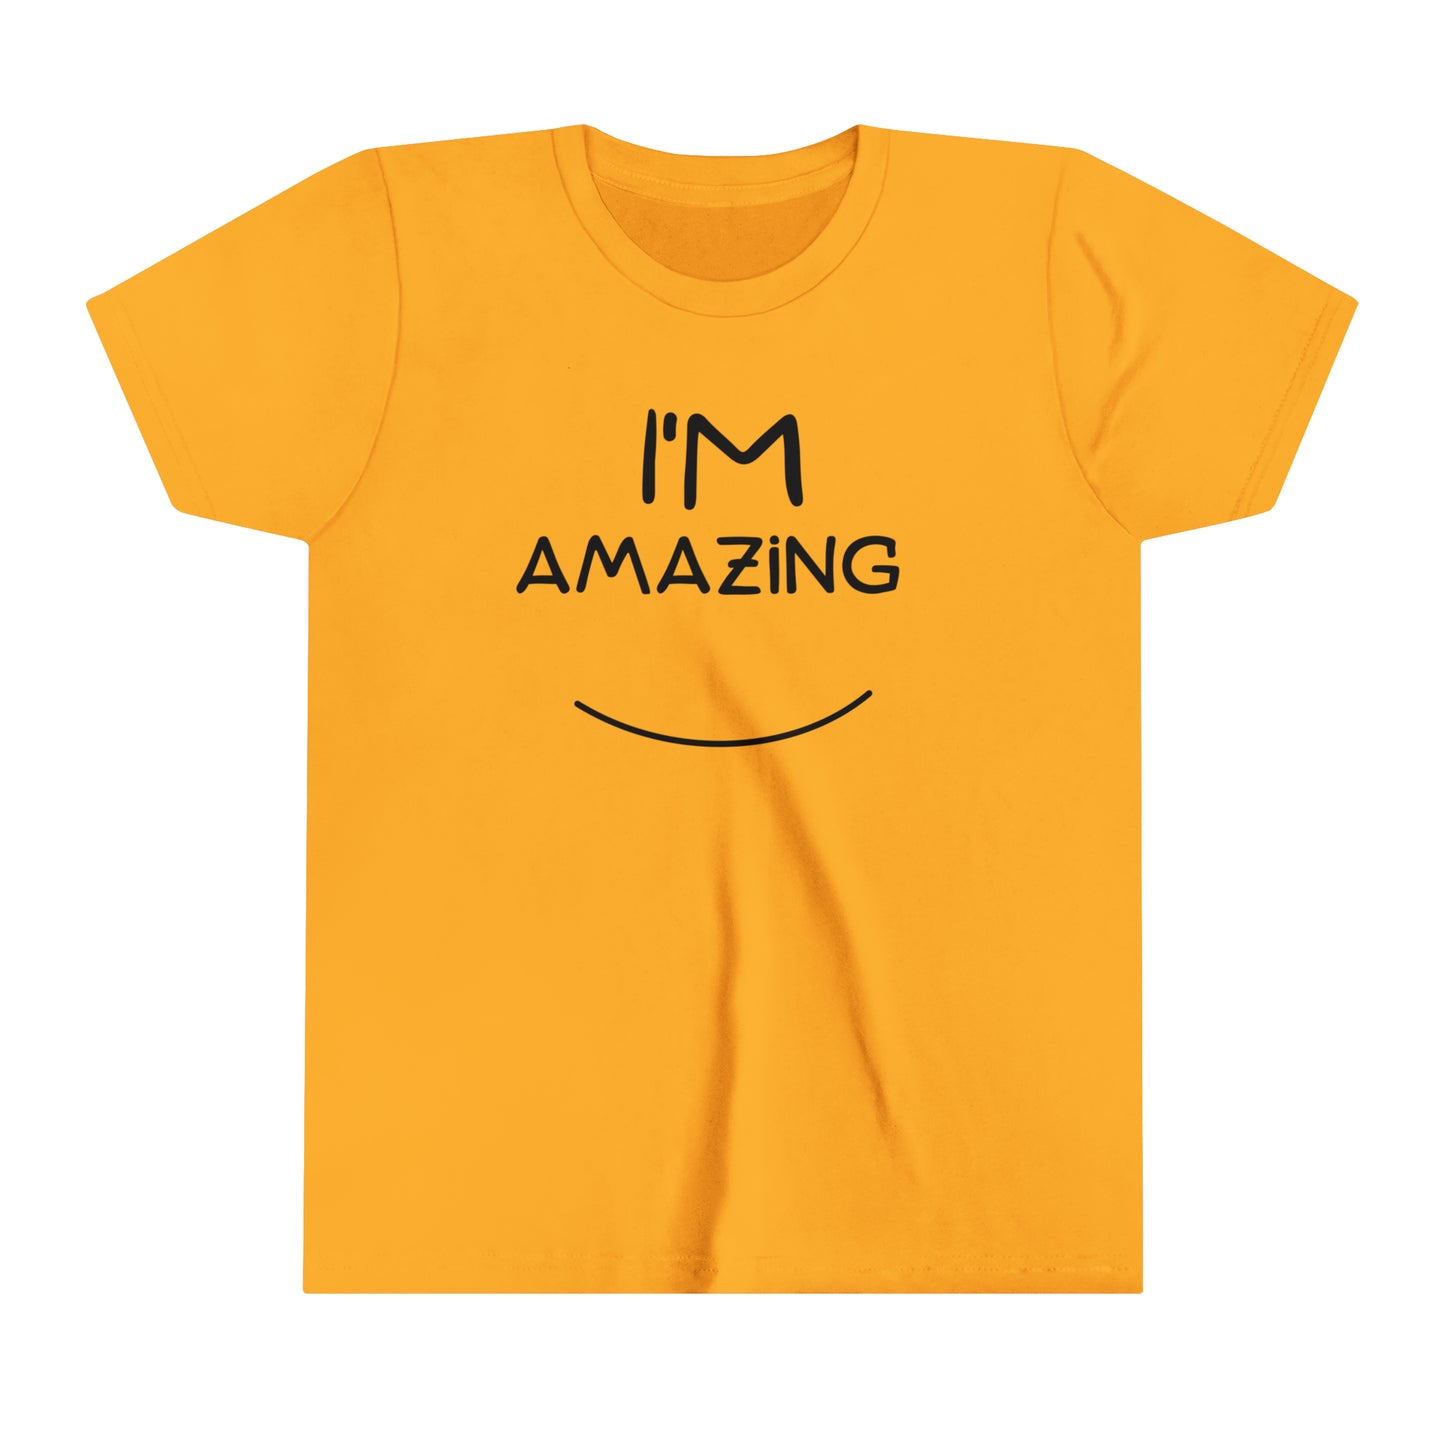 I'm Amazing With Smile, girls shirt, gift for girls, gift for daughters, girls tee